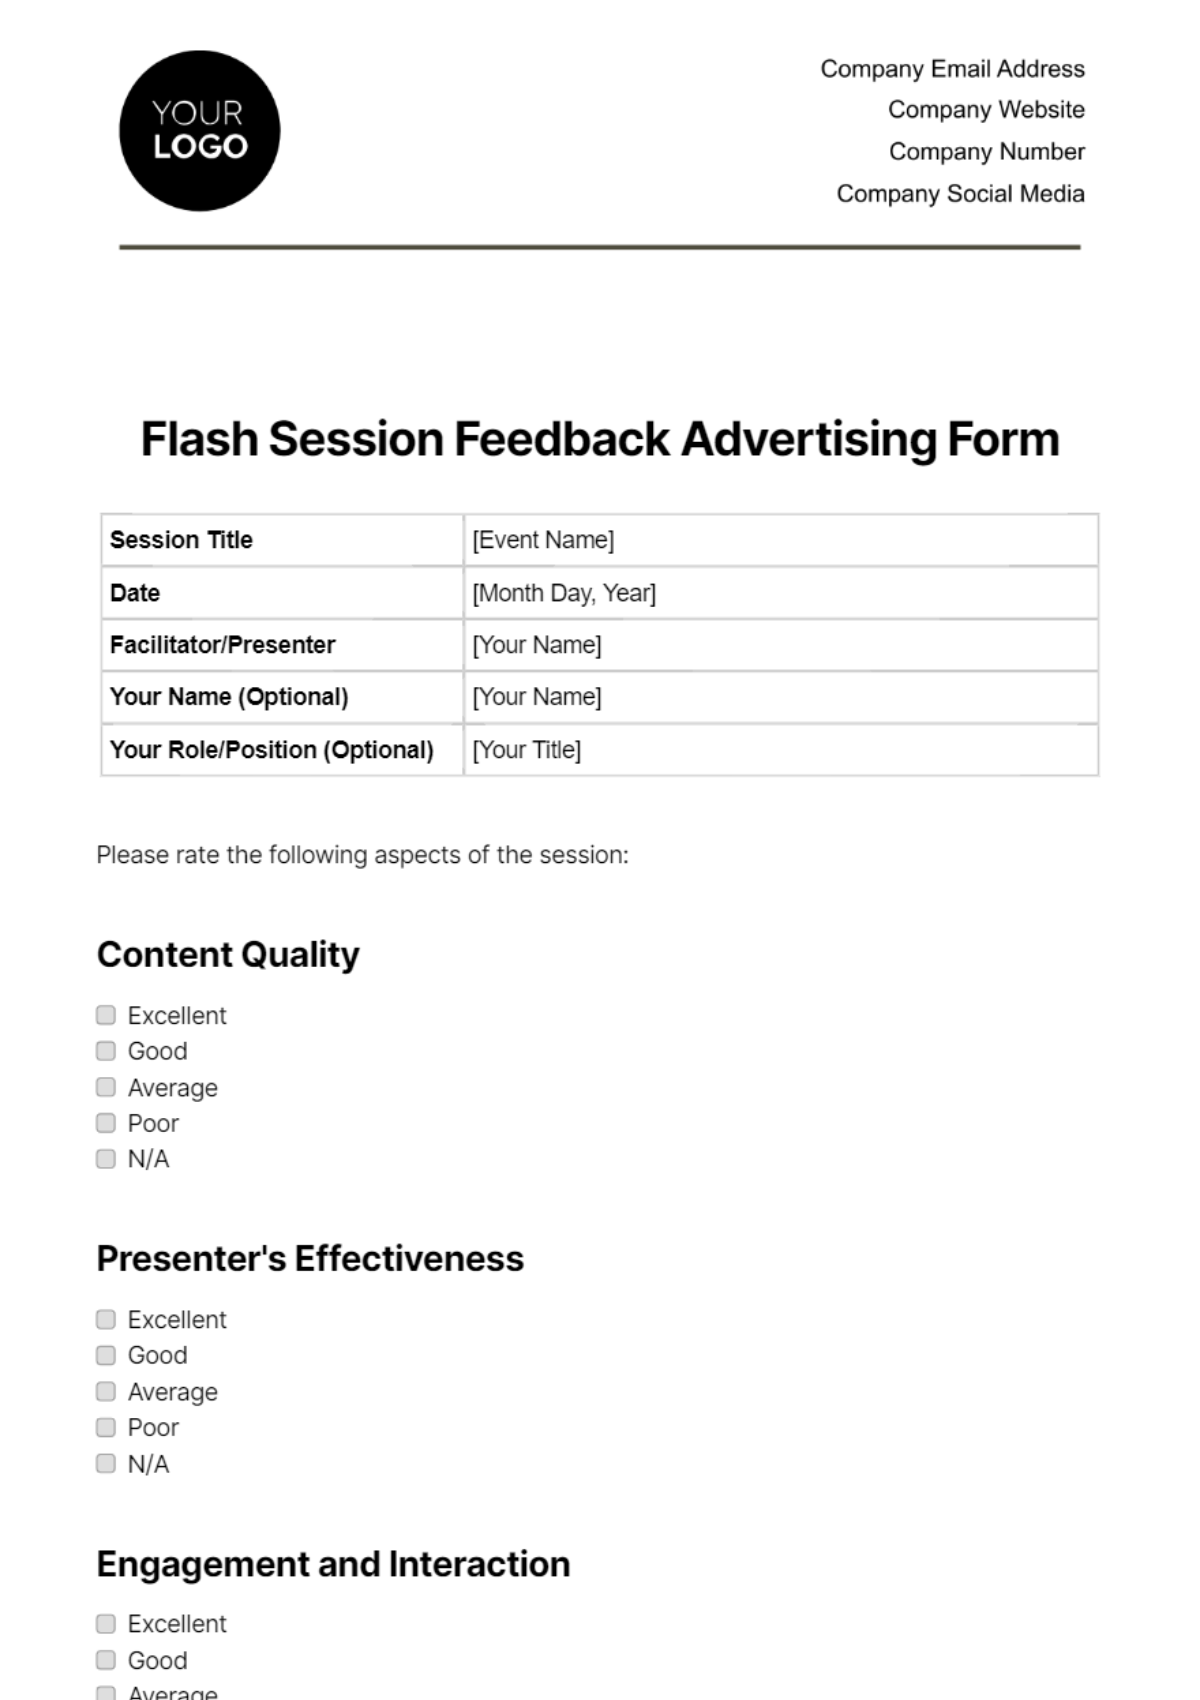 Flash Session Feedback Advertising Form Template